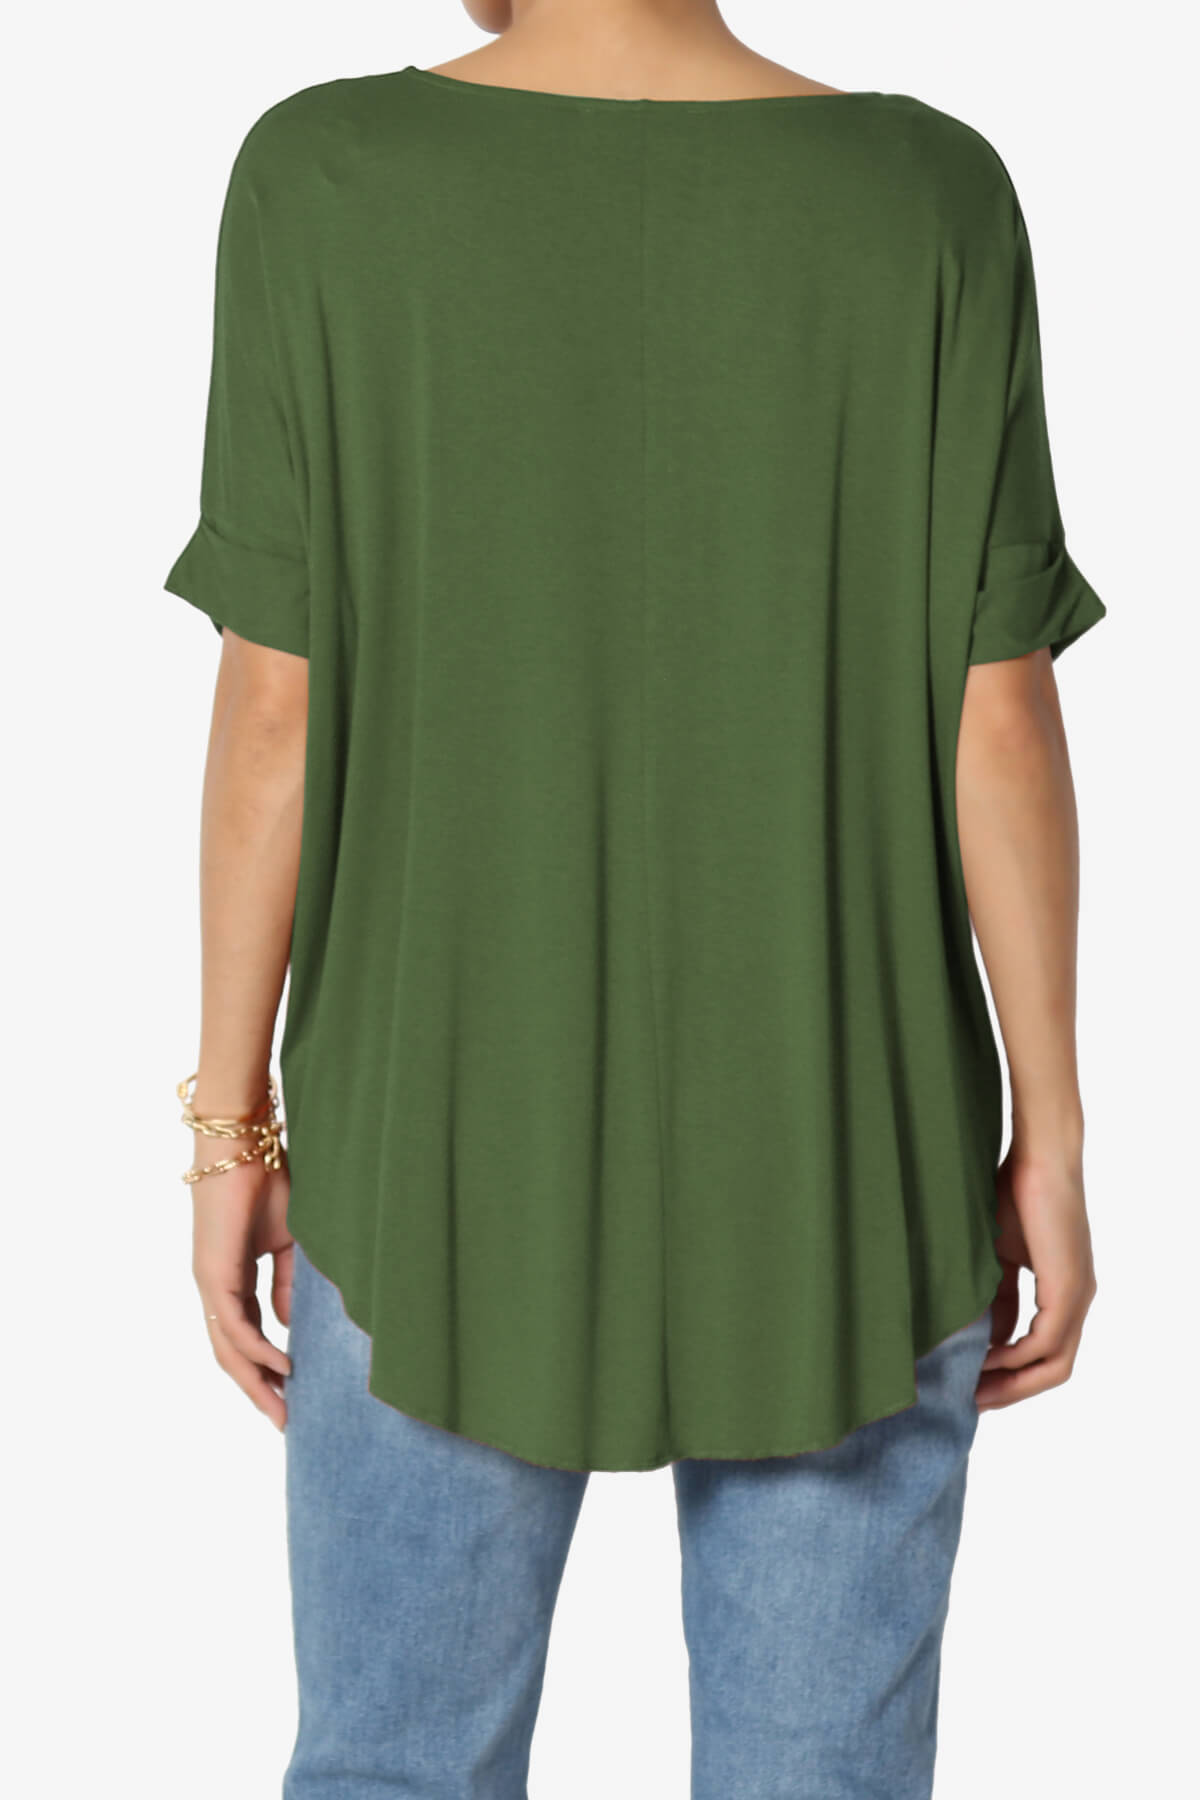 Load image into Gallery viewer, Tackle Wrap Hi-Low Crepe Knit Top ARMY GREEN_2
